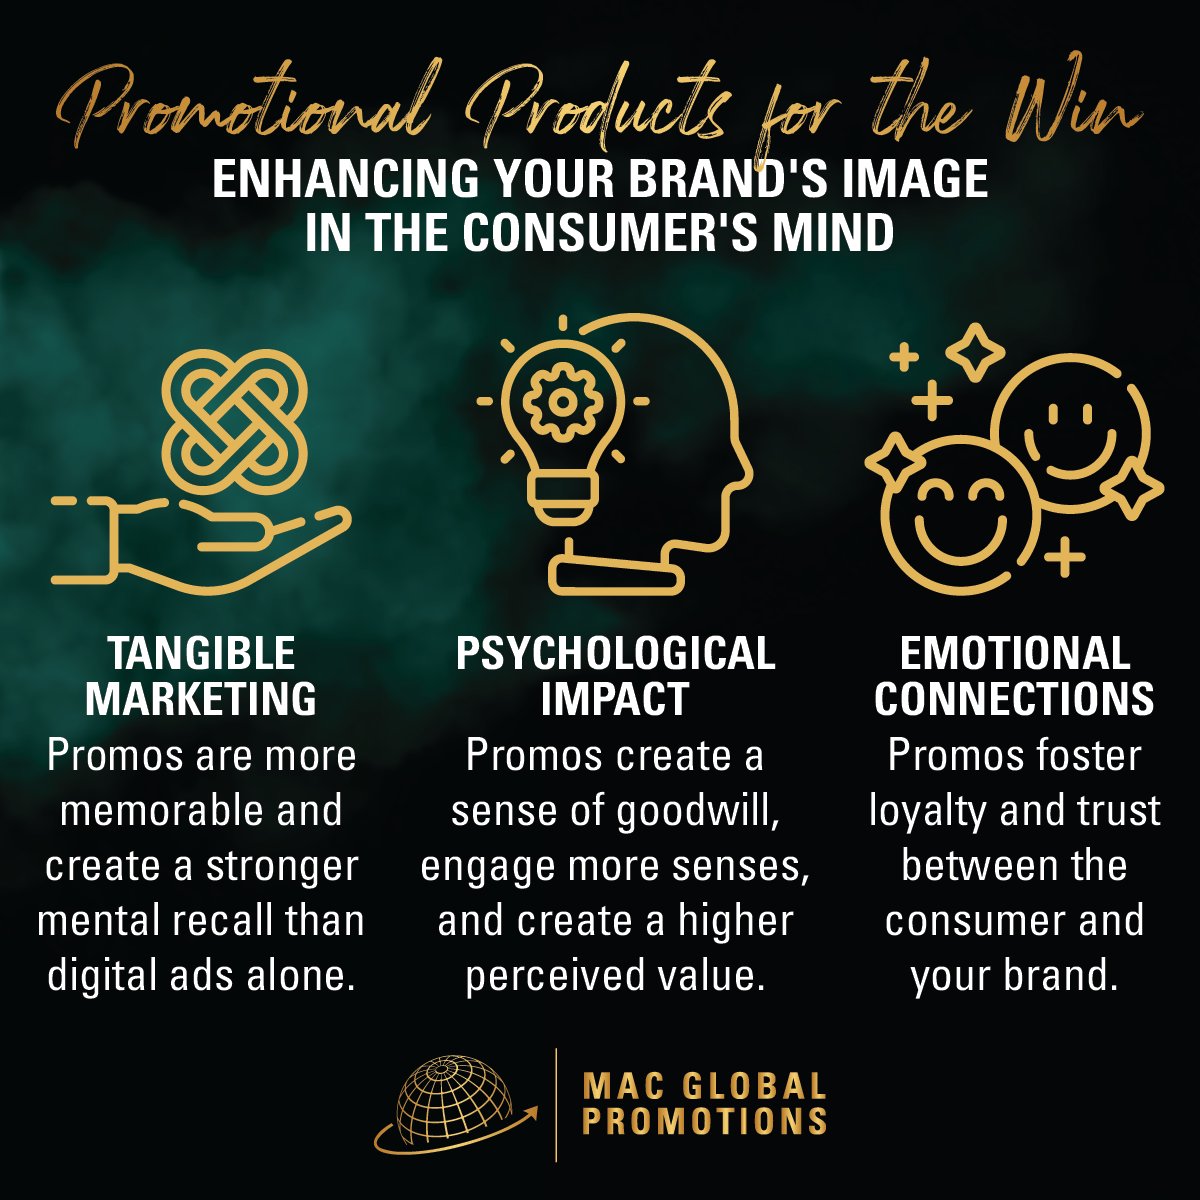 Unlock the secret to lasting #brand loyalty 🗝️💖. #PromotionalProducts are not just #gifts; they're powerful psychological tools that bridge the emotional gap between brands and #consumers. Let us help you turn customers into lifelong fans. 😍 #BrandLove #EmotionalMarketing